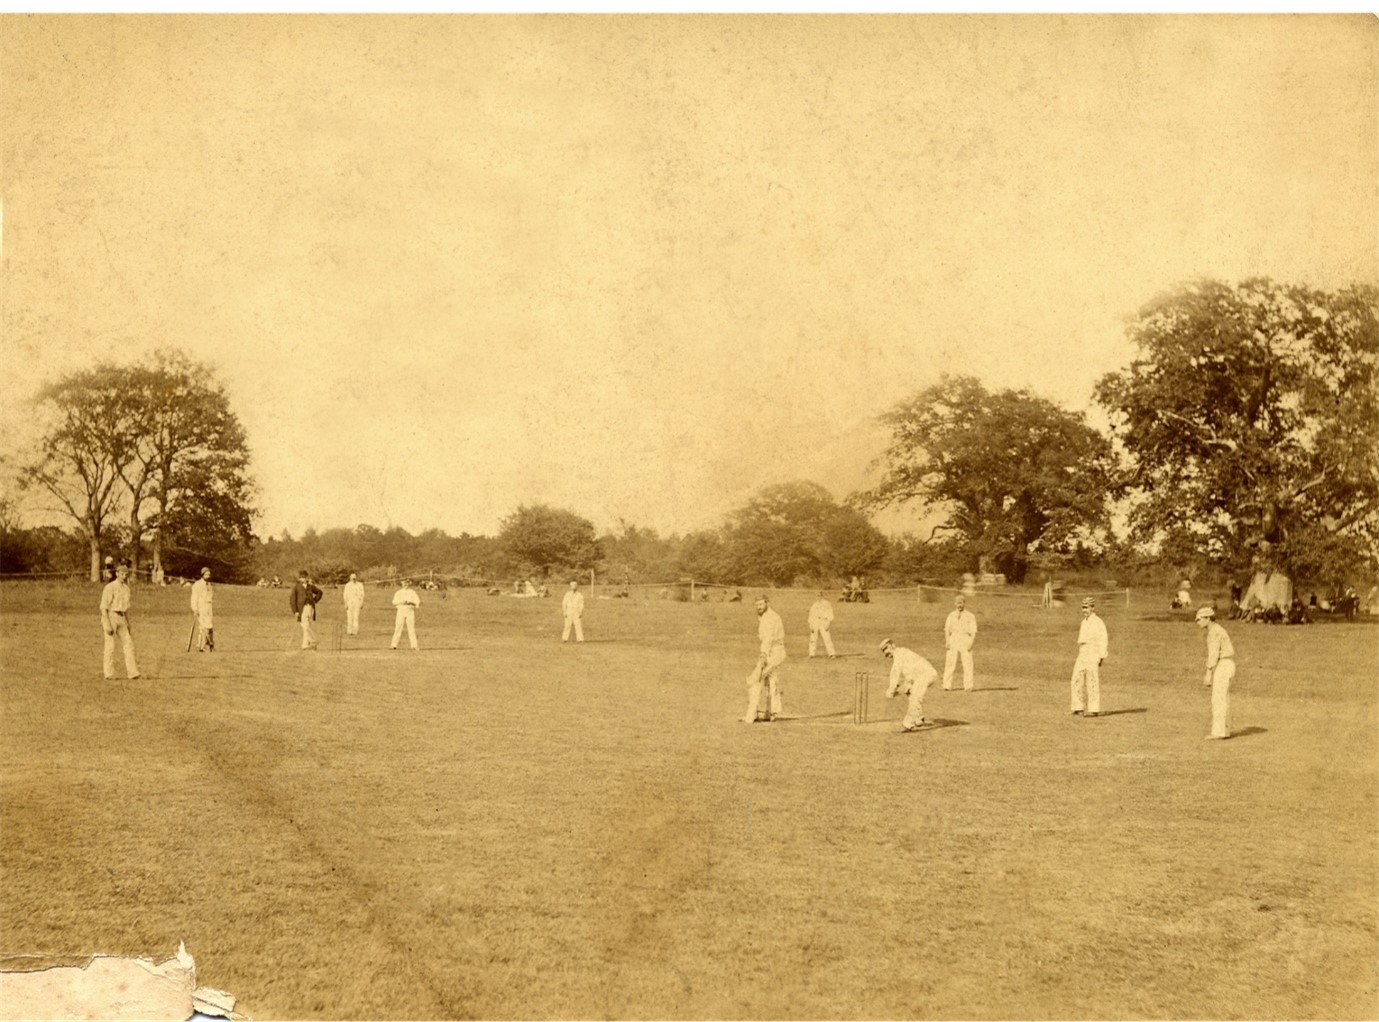 A photograph showing Walter Gilbert about to bowl with Harry Jupp standing at mid-on. The batsman is the Montgomery captain Harry Evans and the wicket keeper is Charles Kennedy of Sussex.